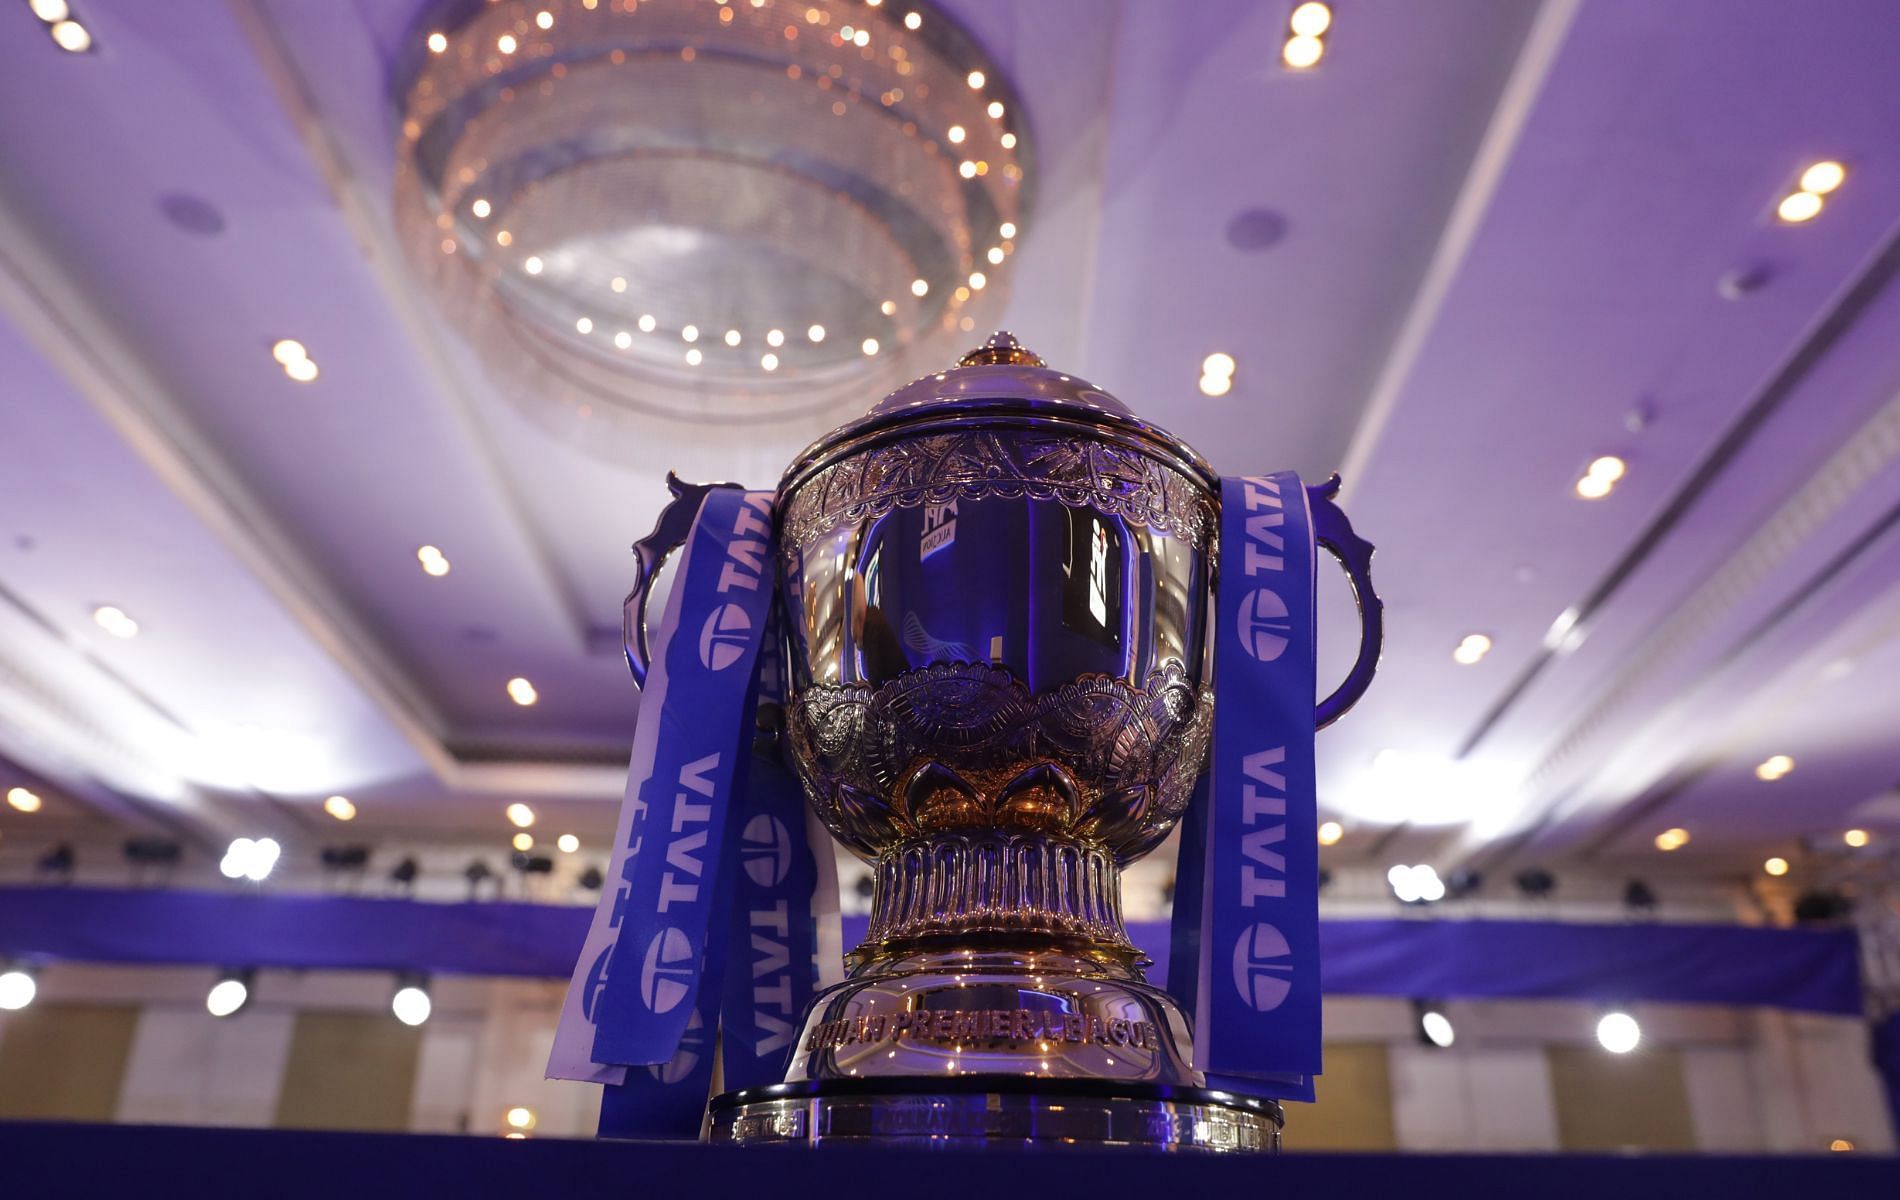 IPL 2022 will be played in Mumbai and Pune, according to reports.